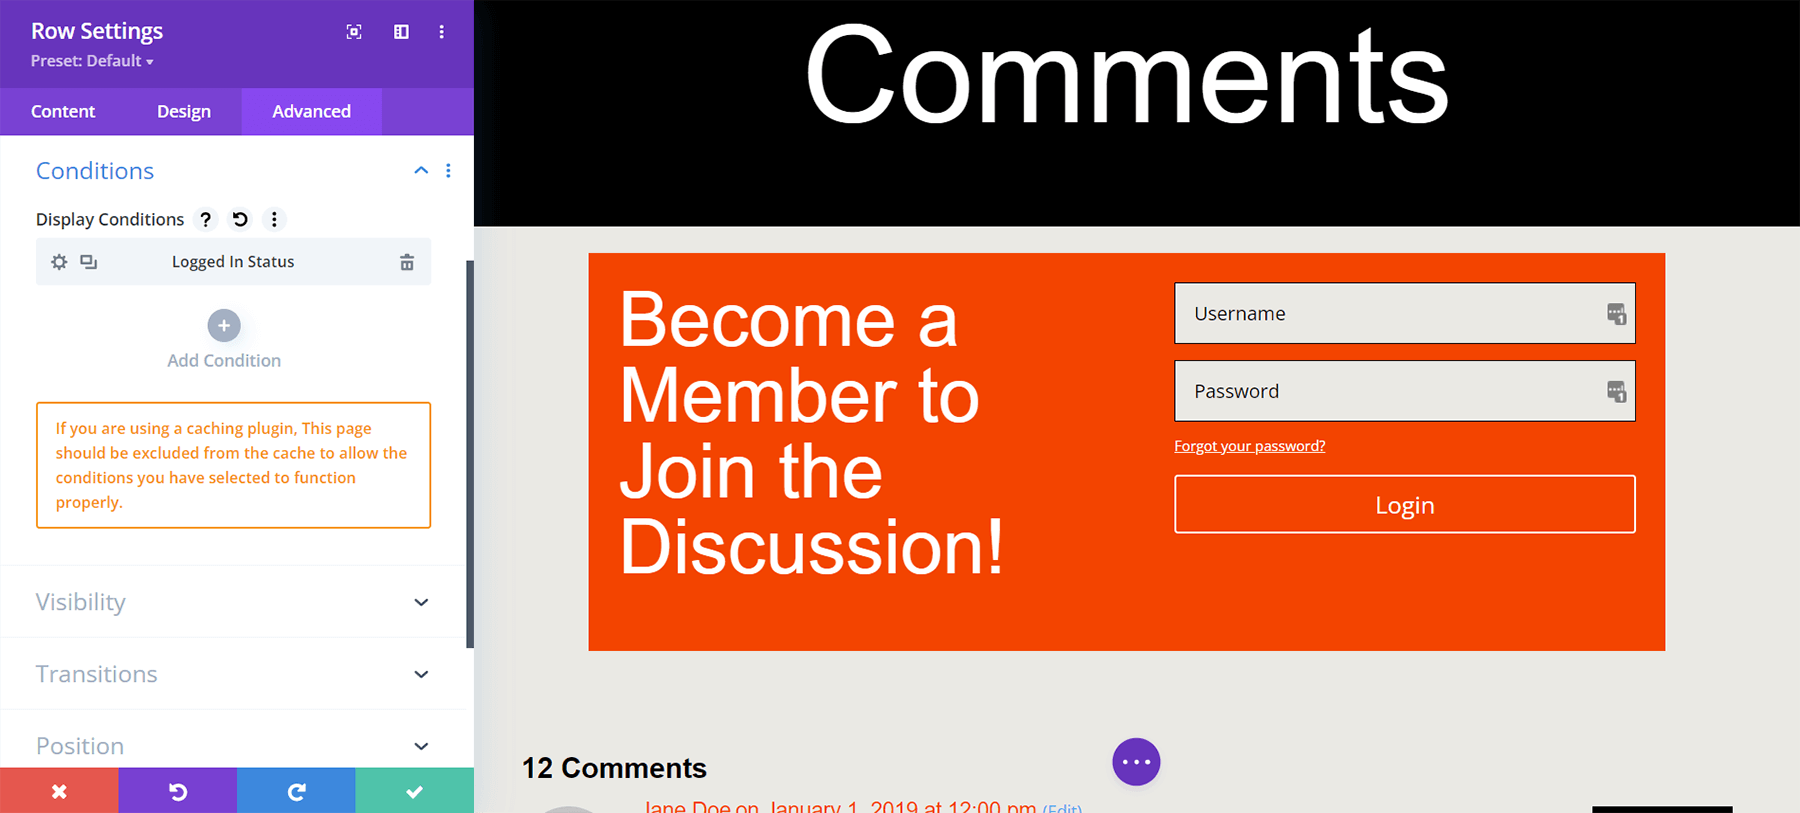 Save display conditions settings in preparation for our members only comment section